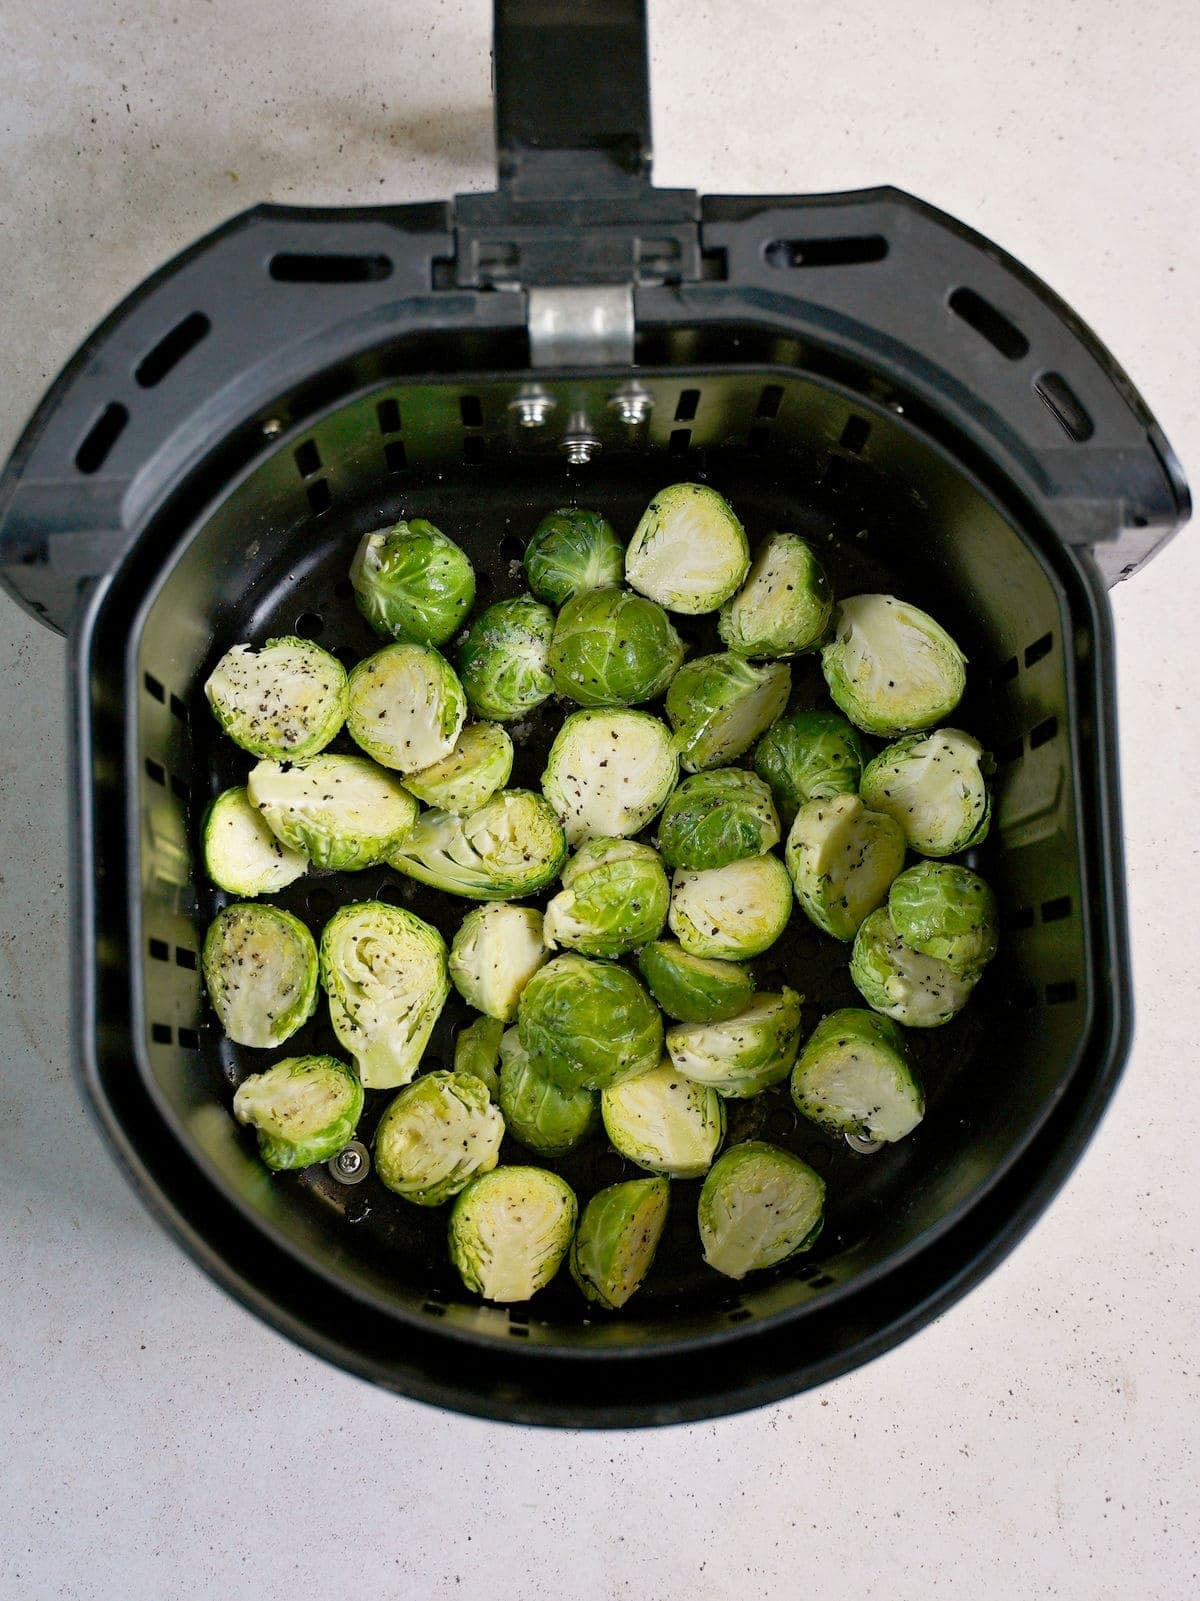 Brussel sprouts in air fryer